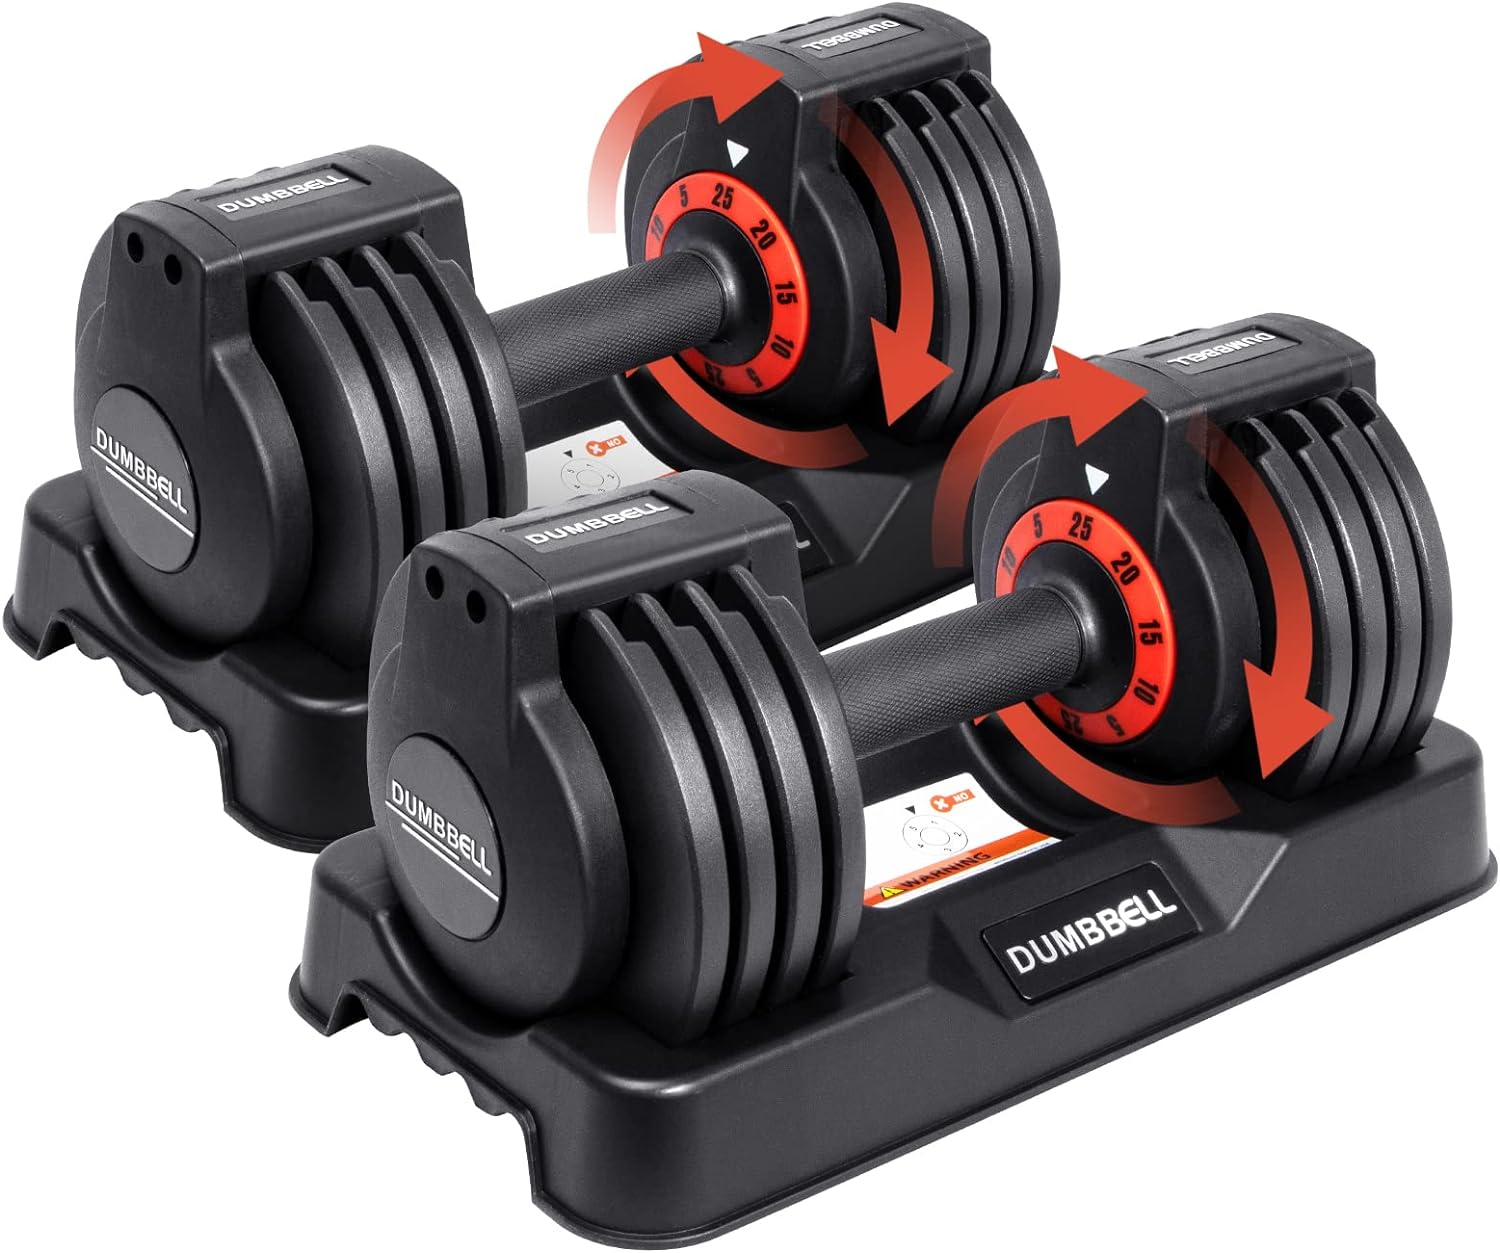 25/55 lbs Pair Adjustable Dumbbell Set, Fast Adjust Dumbbell Weight for Exercises Pair Dumbbells for Men and Women in Home Gym Workout Equipment, Dumbbell with Tray Suitable for Full Body